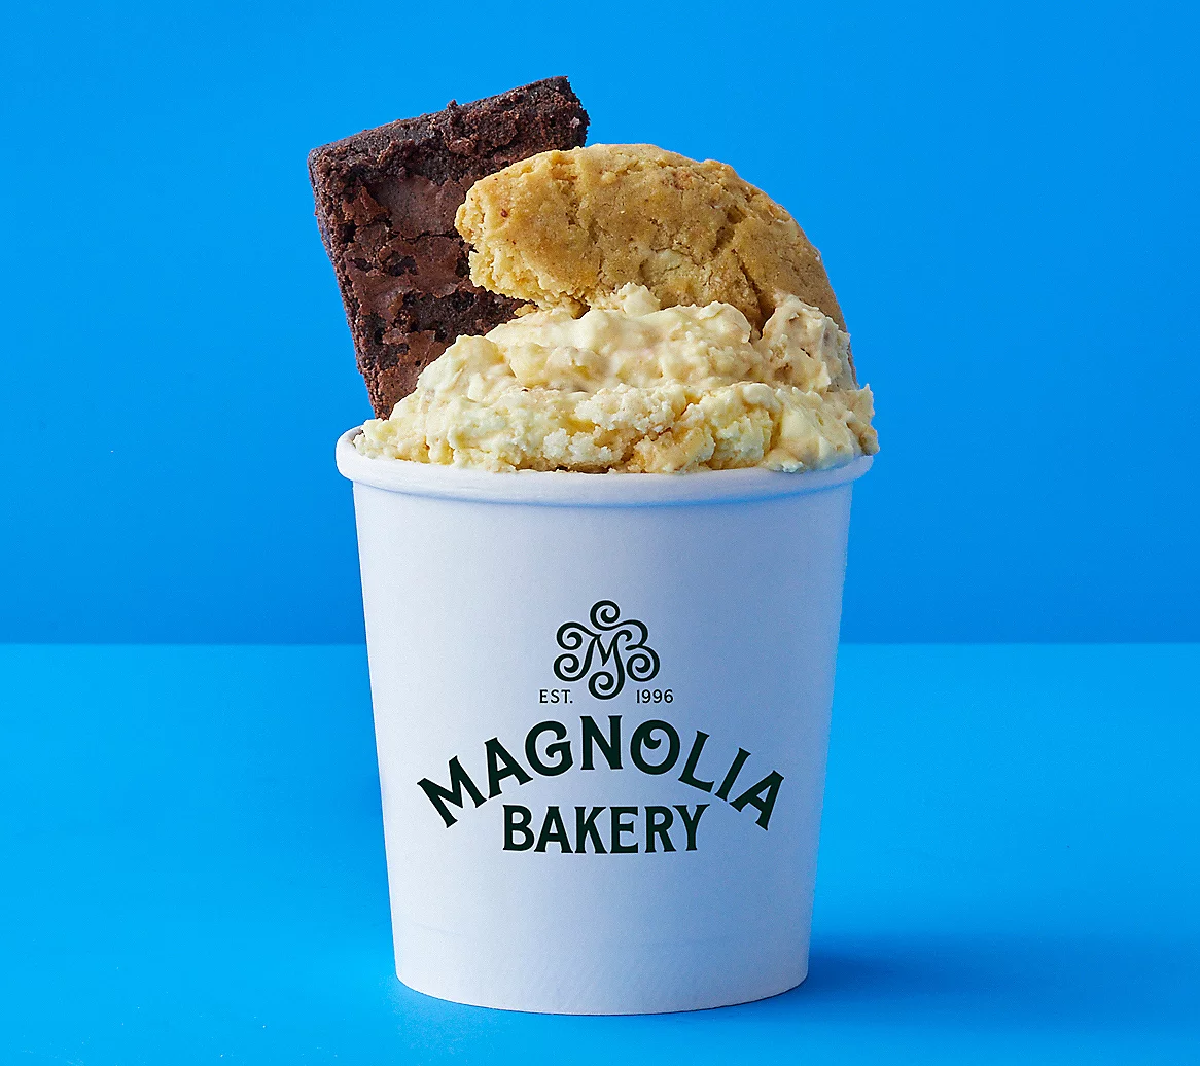 Magnolia bakery banana pudding topped with a double-fudge brownie and a soft-baked banana pudding cookie